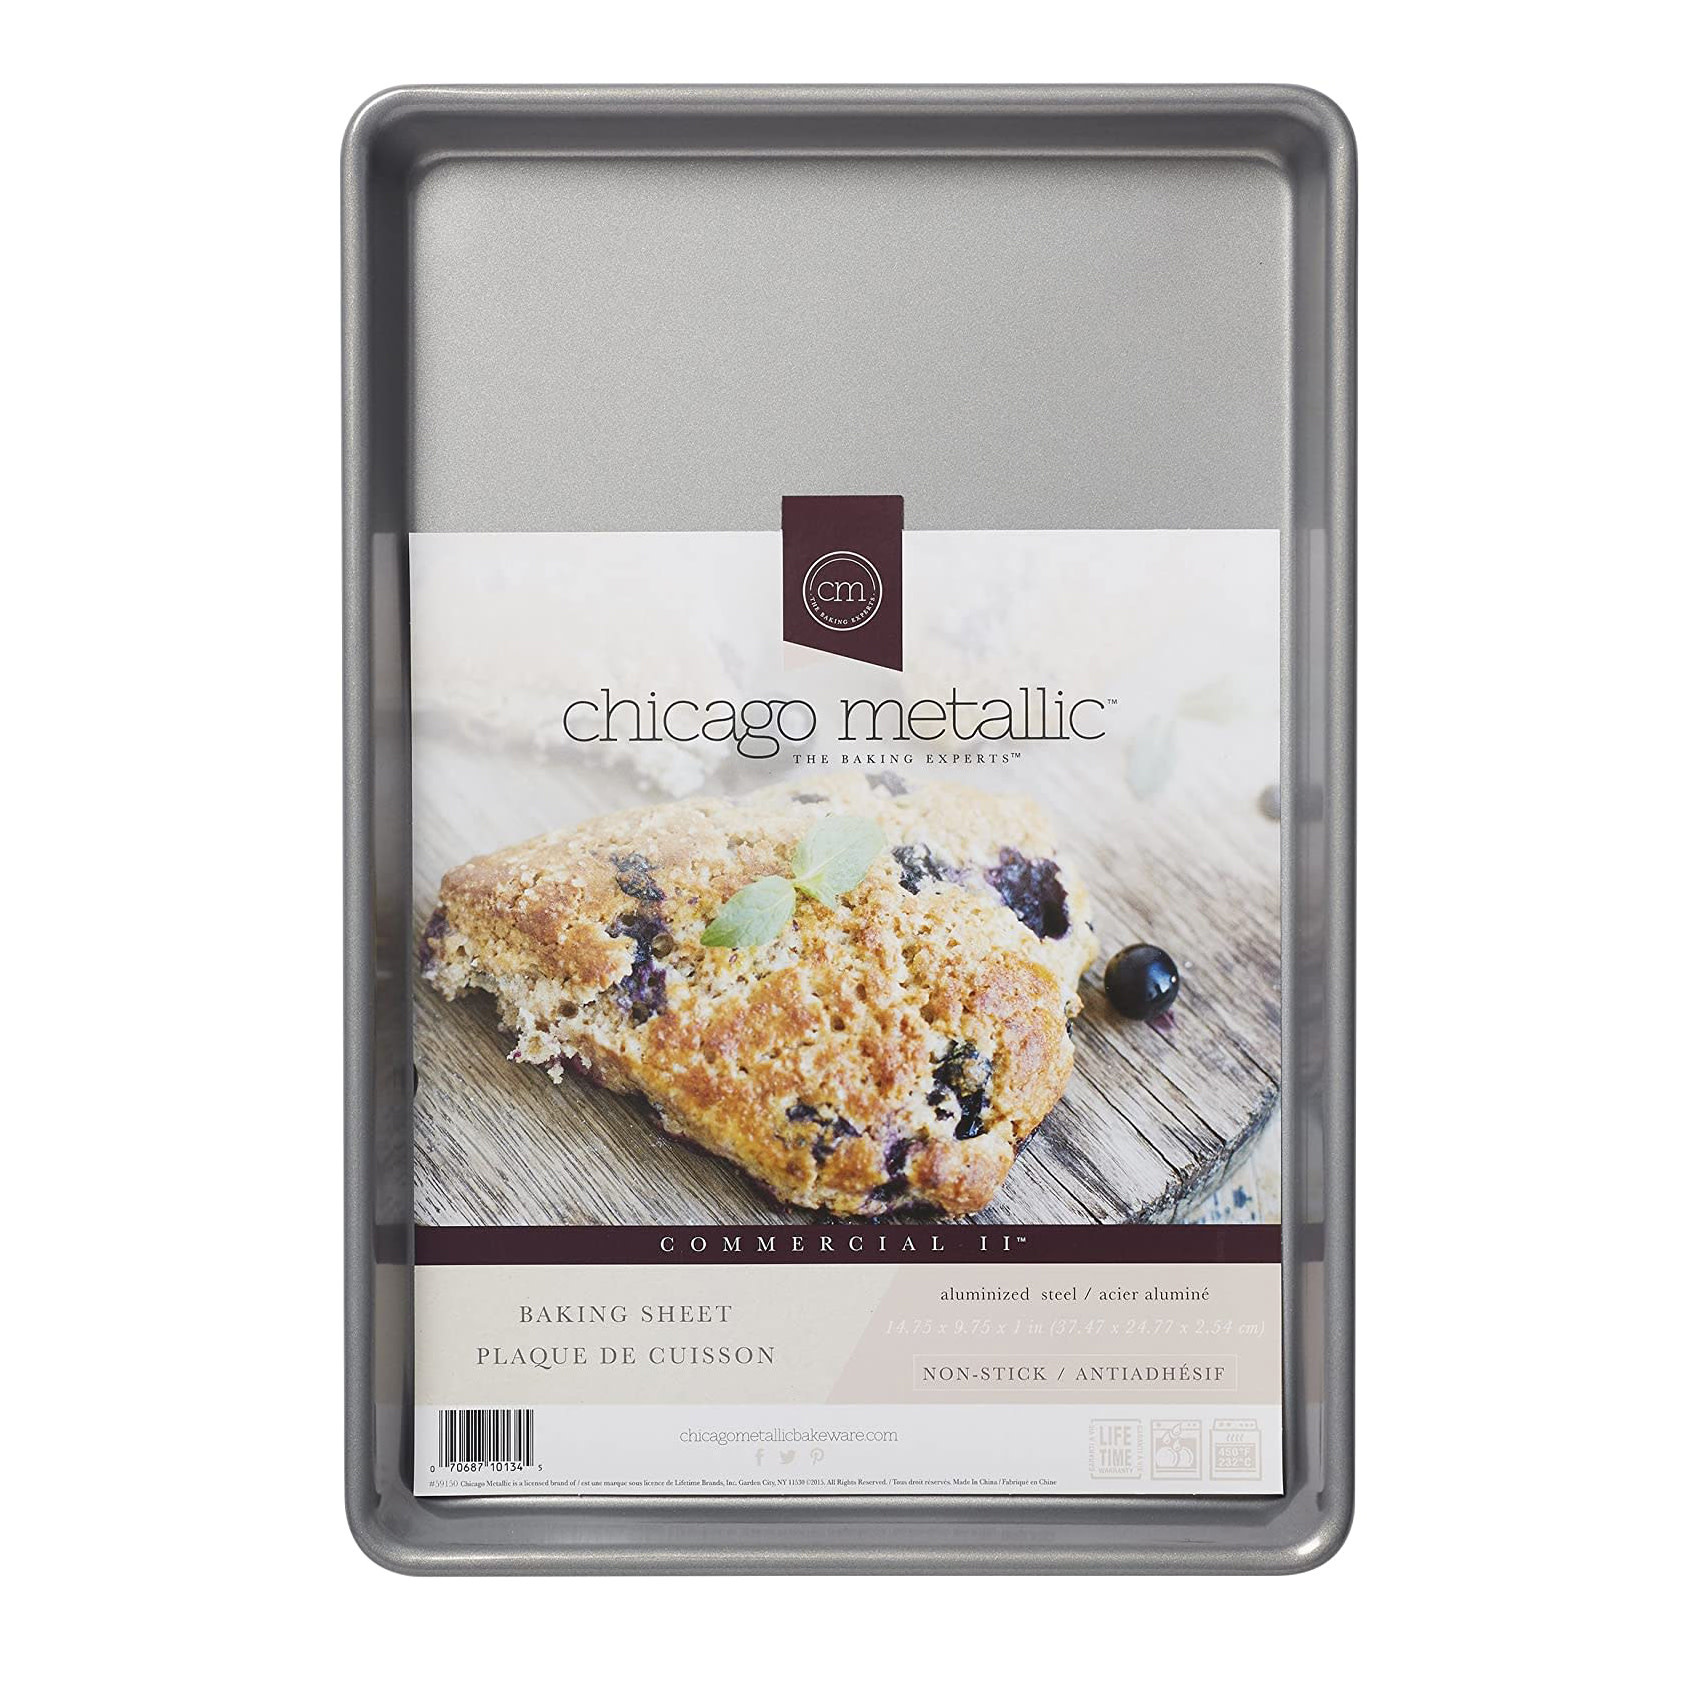 Chicago Metallic Commercial II 12x17 Jelly Roll Pan